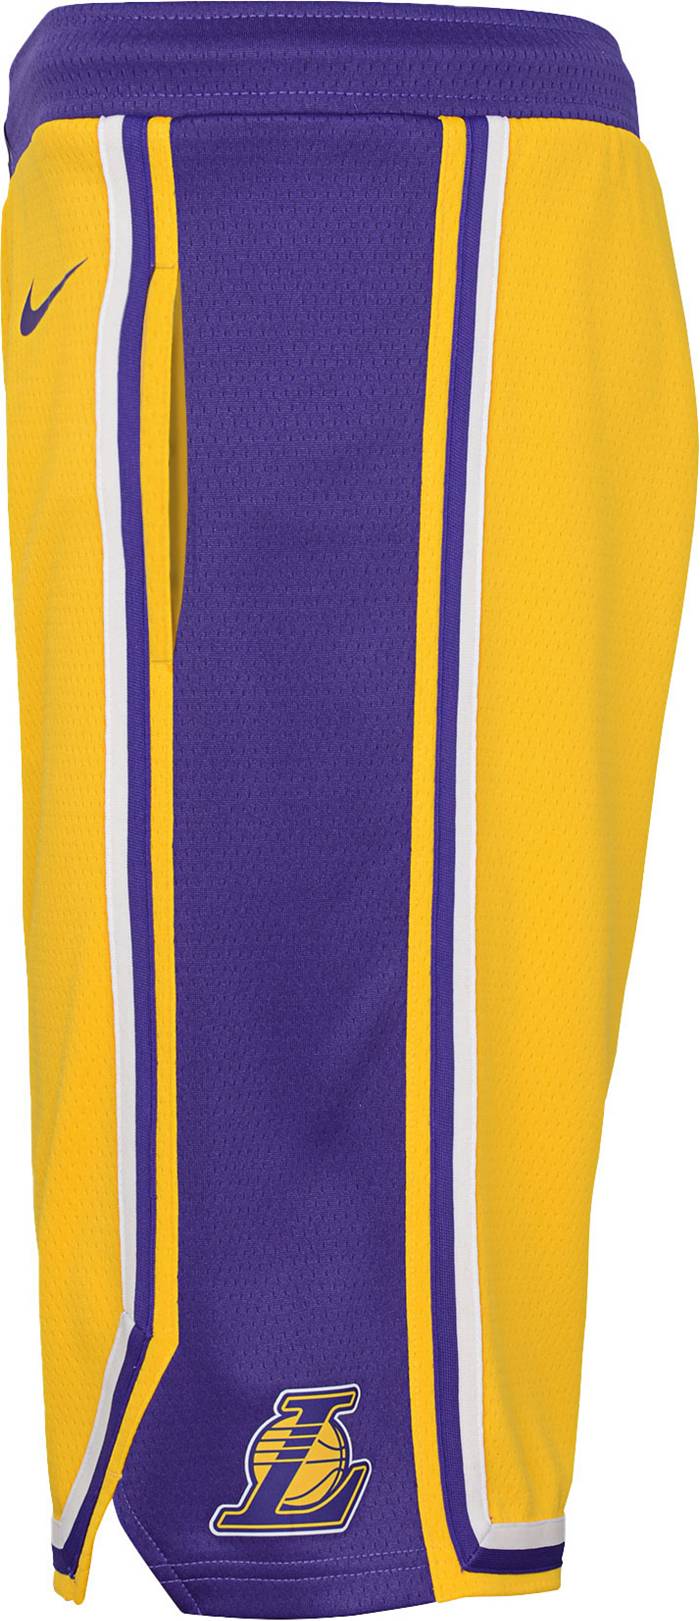 lakers youth shorts yellow